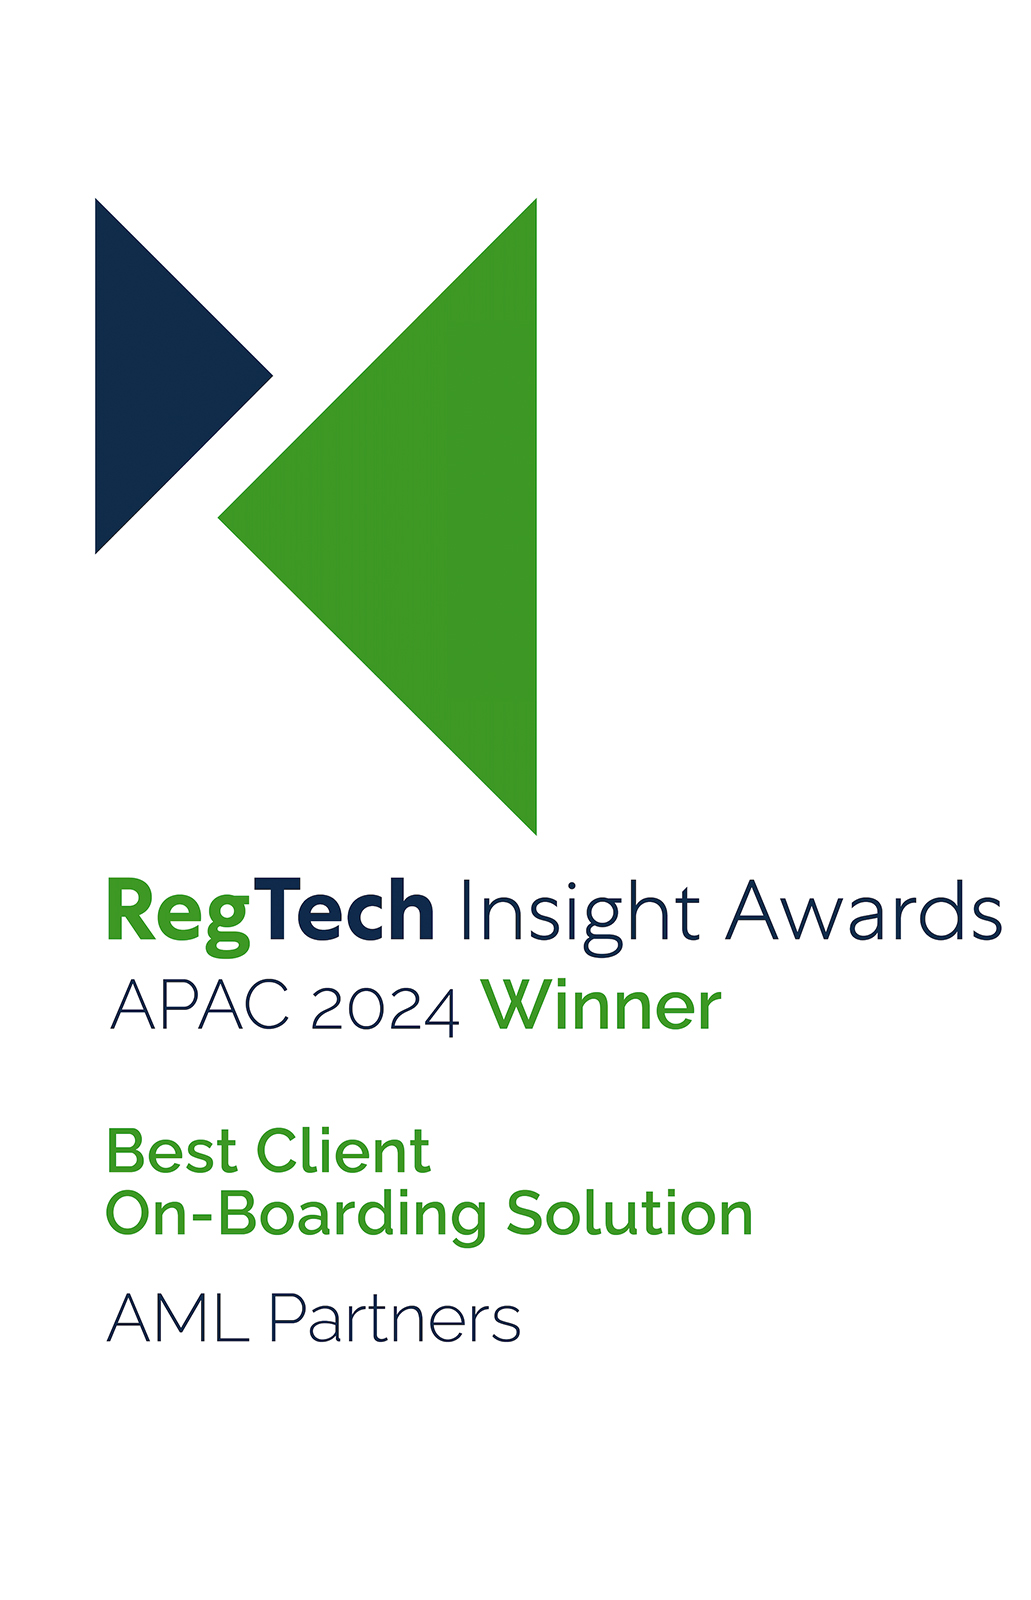 Art shows the logo of the RegTech Insight APAC Region awards program for 2024 and the logo of AML Partners and their RegTechONE platform for AML Compliance, GRC, KYC/CDD onboarding, and related Risk Management. AML Partners and RegTechONE named Best Client Onboarding Solution.